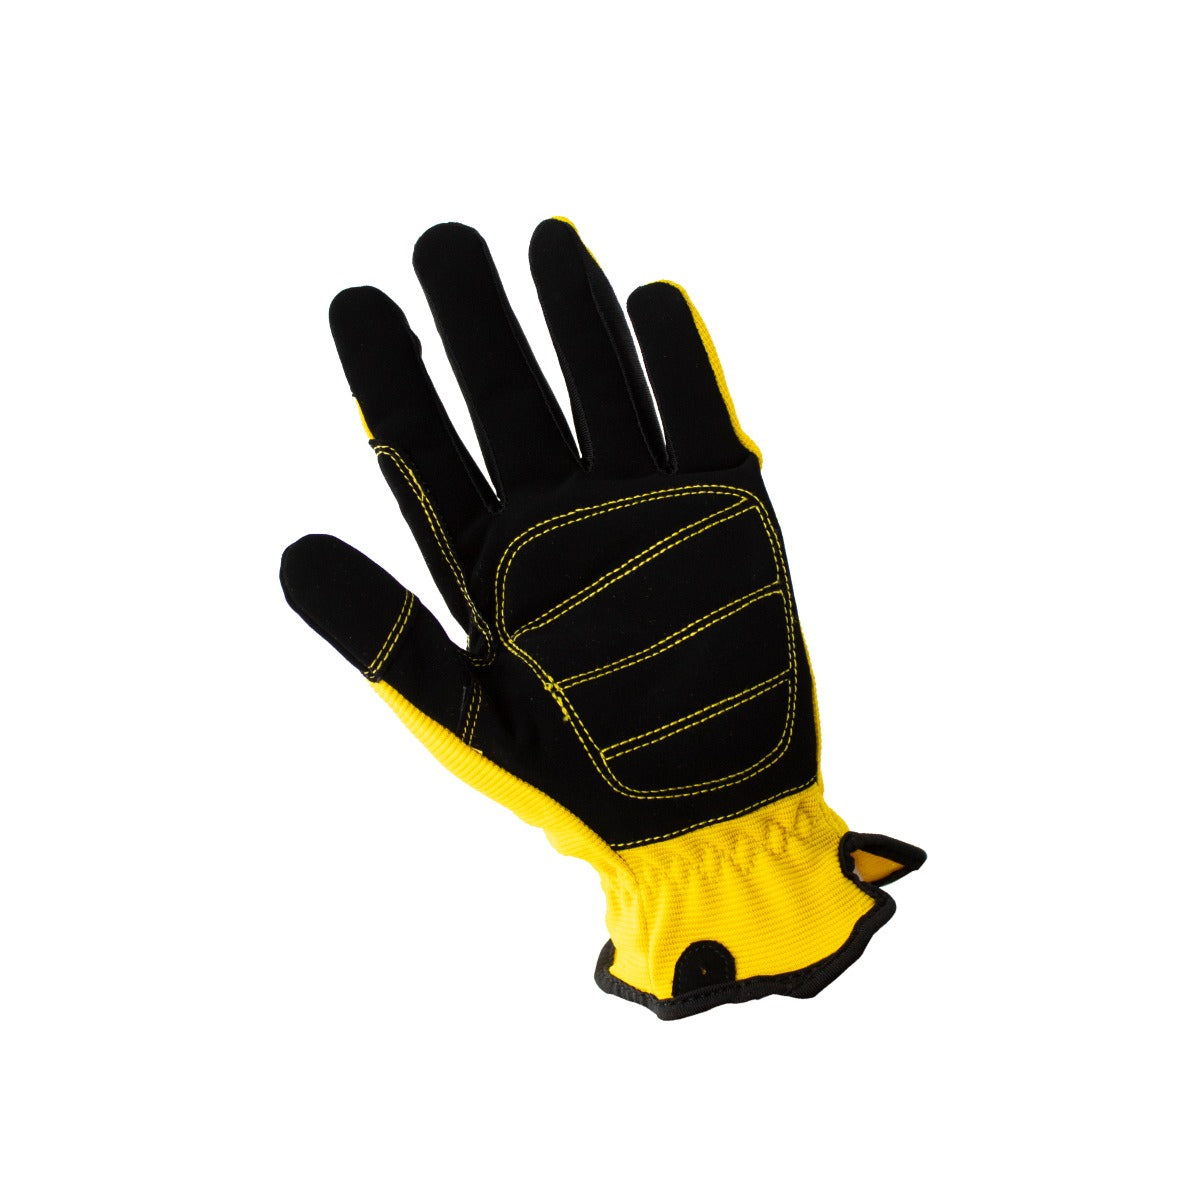 FHC Lightweight Form Fitting Glove - Leather Palm